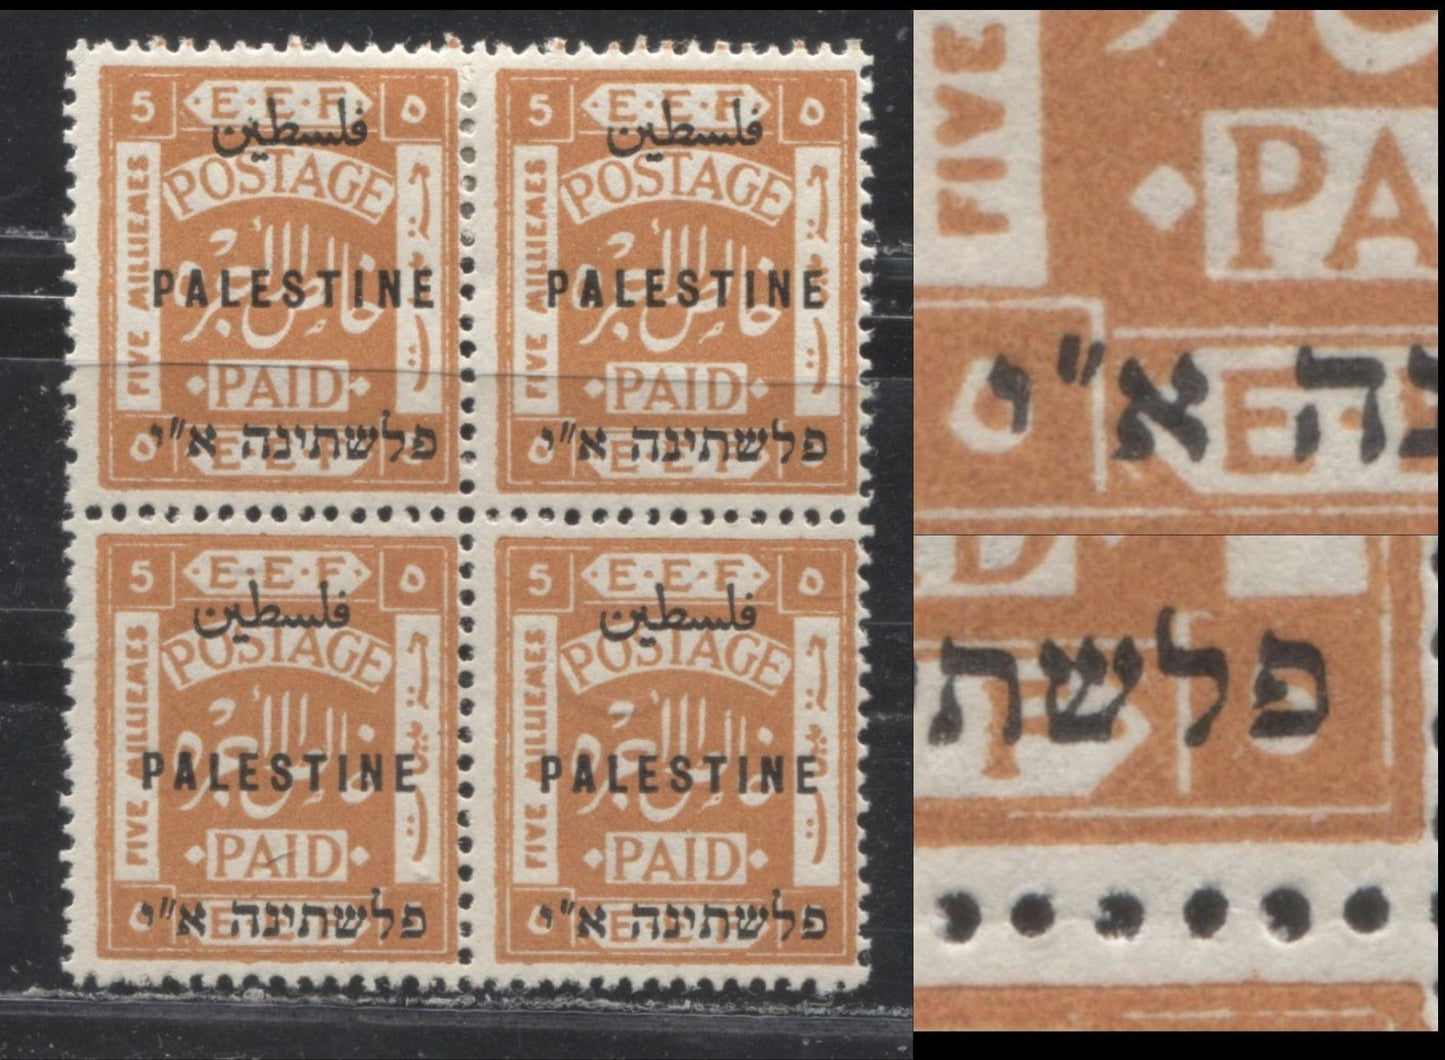 Lot 31 Palestine SG#64rp 5m Deep Dull Orange "Postage Paid" and "E.E.F" in Frame, 1921-1922 First London Overprinted Issue, A Fine OG & Fine NH Block of 4, Perf. 15 x 14, Royal Cypher Watermark, Overprint Types 2-3 and 8-9